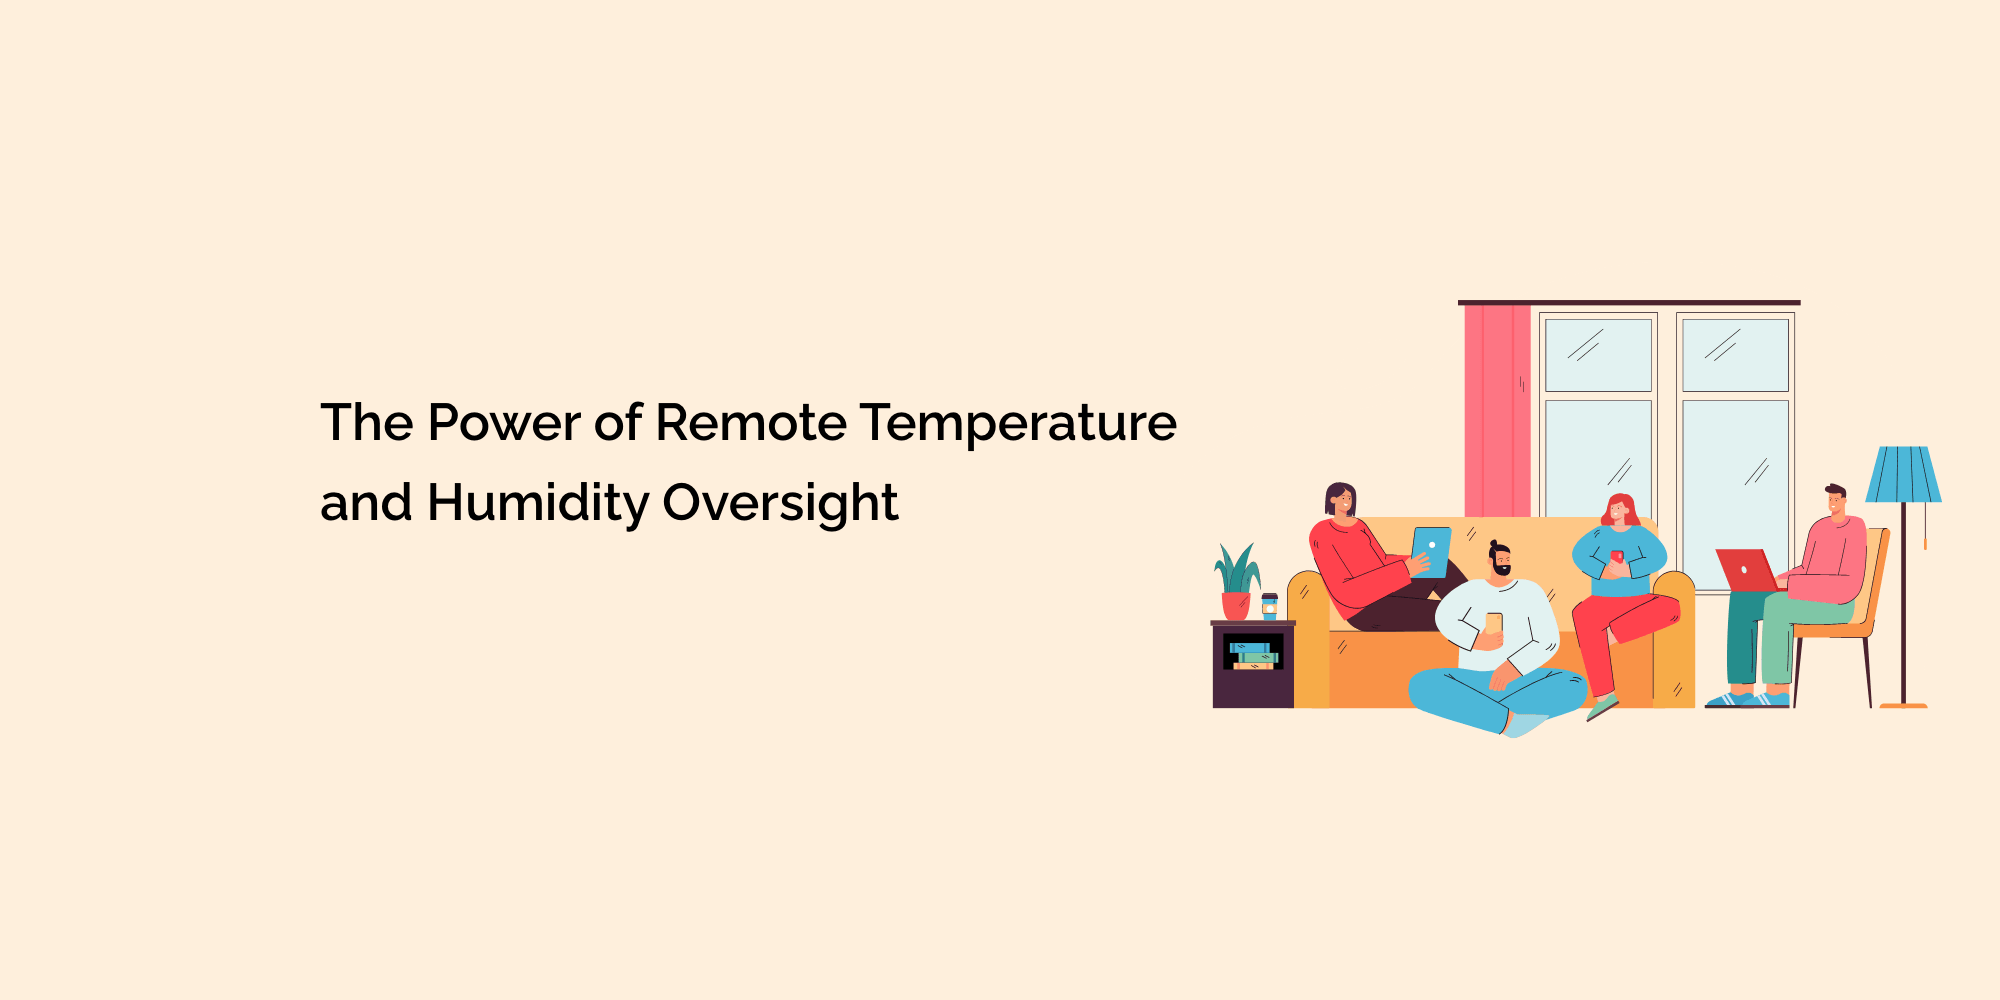 The Power of Remote Temperature and Humidity Oversight